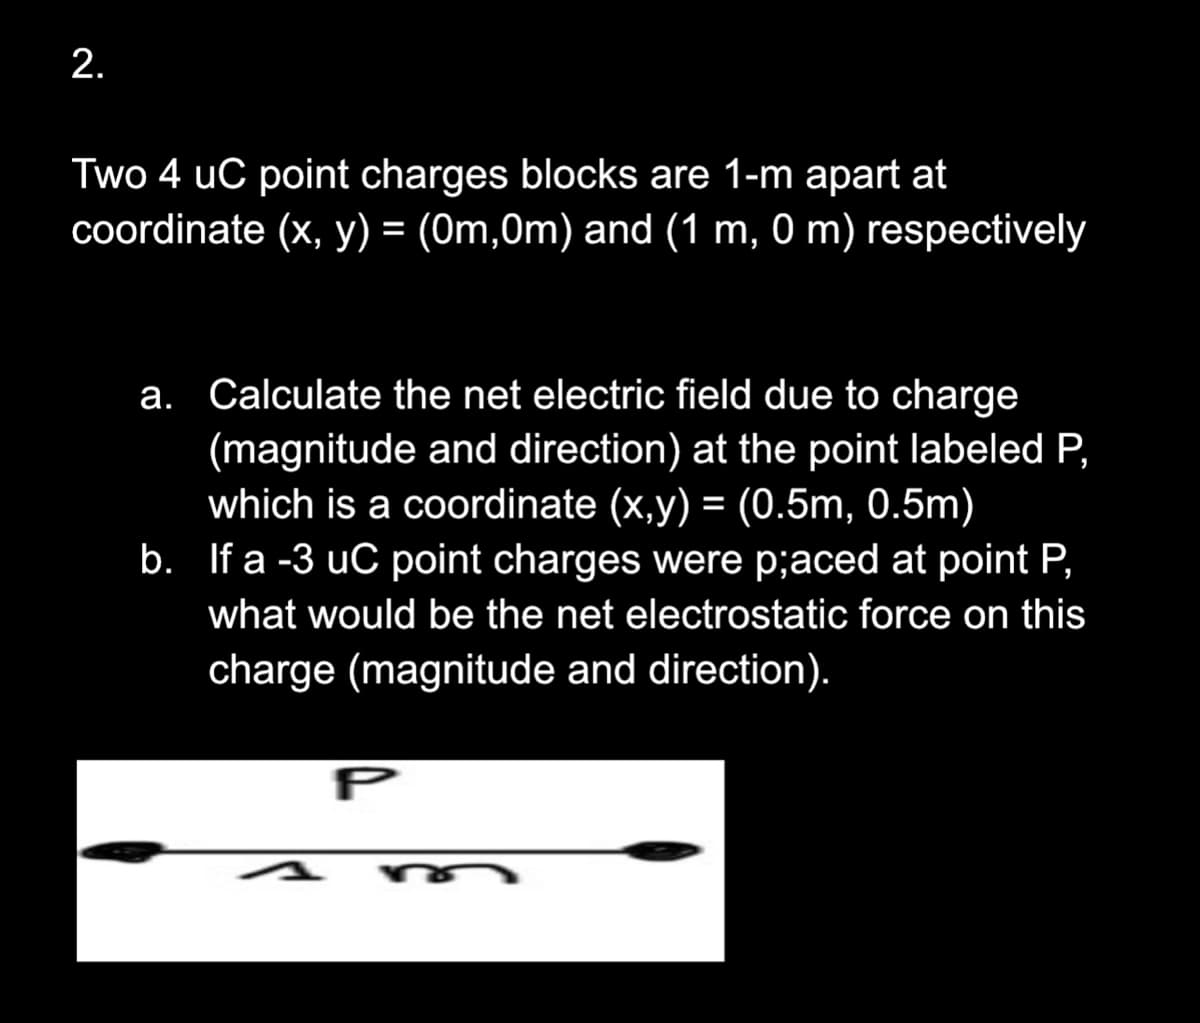 2.
Two 4 uC point charges blocks are 1-m apart at
coordinate (x, y) = (0m,0m) and (1 m, 0 m) respectively
a. Calculate the net electric field due to charge
(magnitude and direction) at the point labeled P,
which is a coordinate (x,y) = (0.5m, 0.5m)
b. If a -3 uC point charges were p;aced at point P,
what would be the net electrostatic force on this
charge (magnitude and direction).
